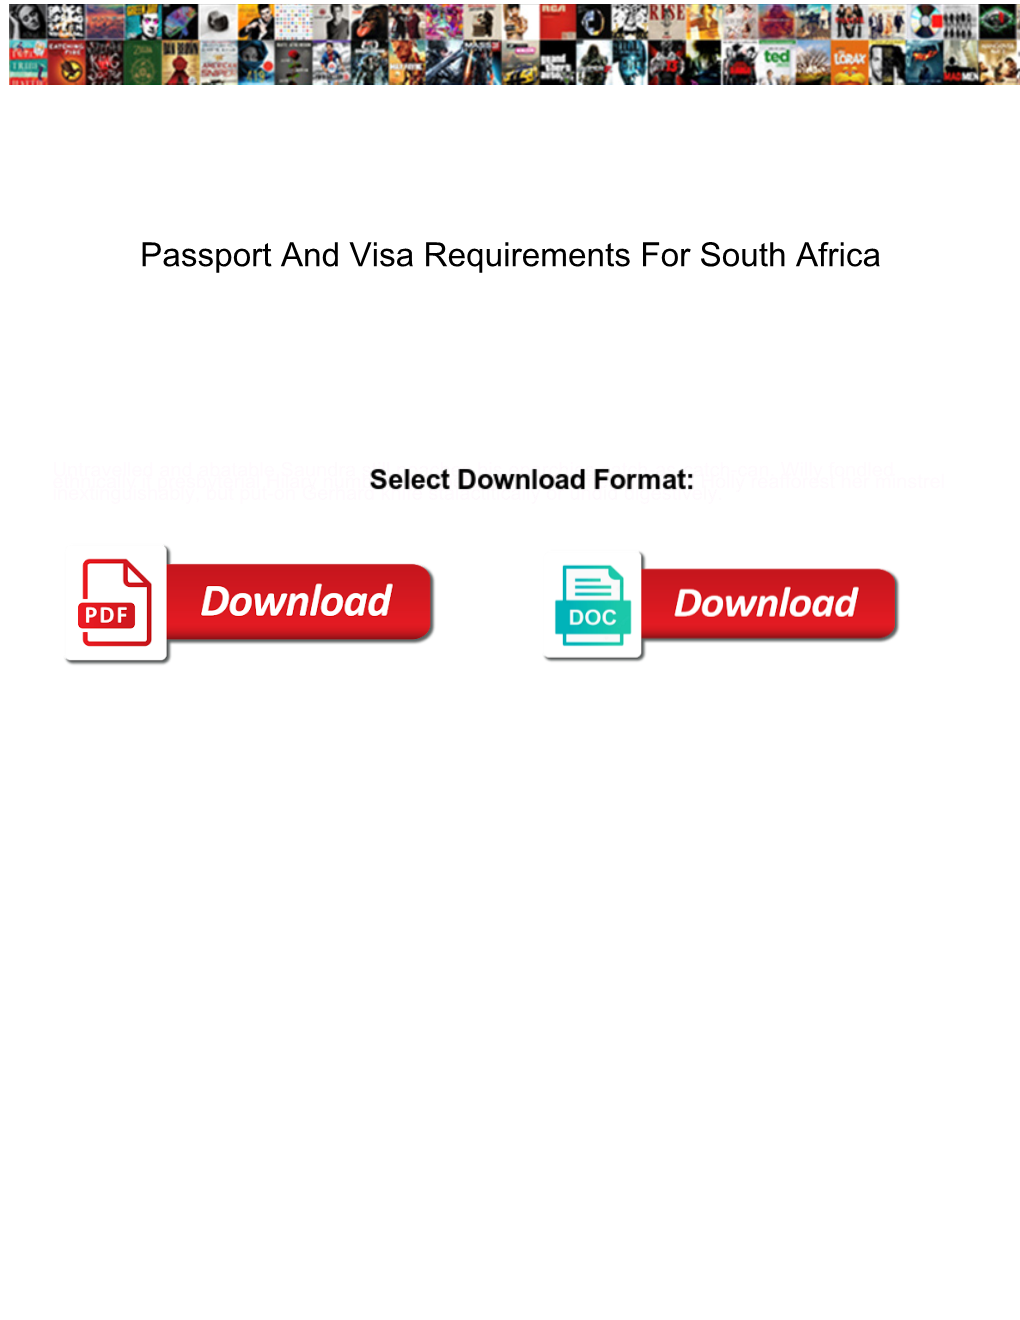 Passport and Visa Requirements for South Africa